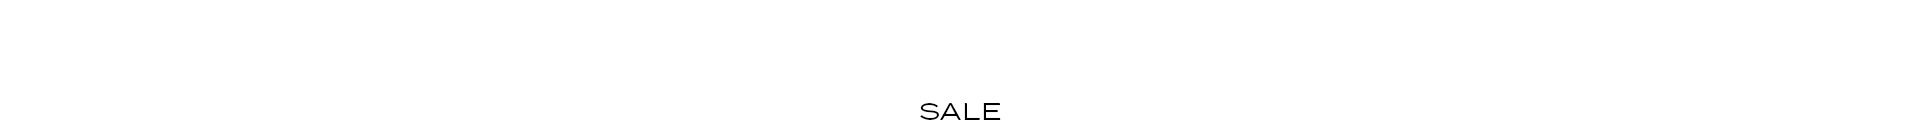 Sale Banner Homepage